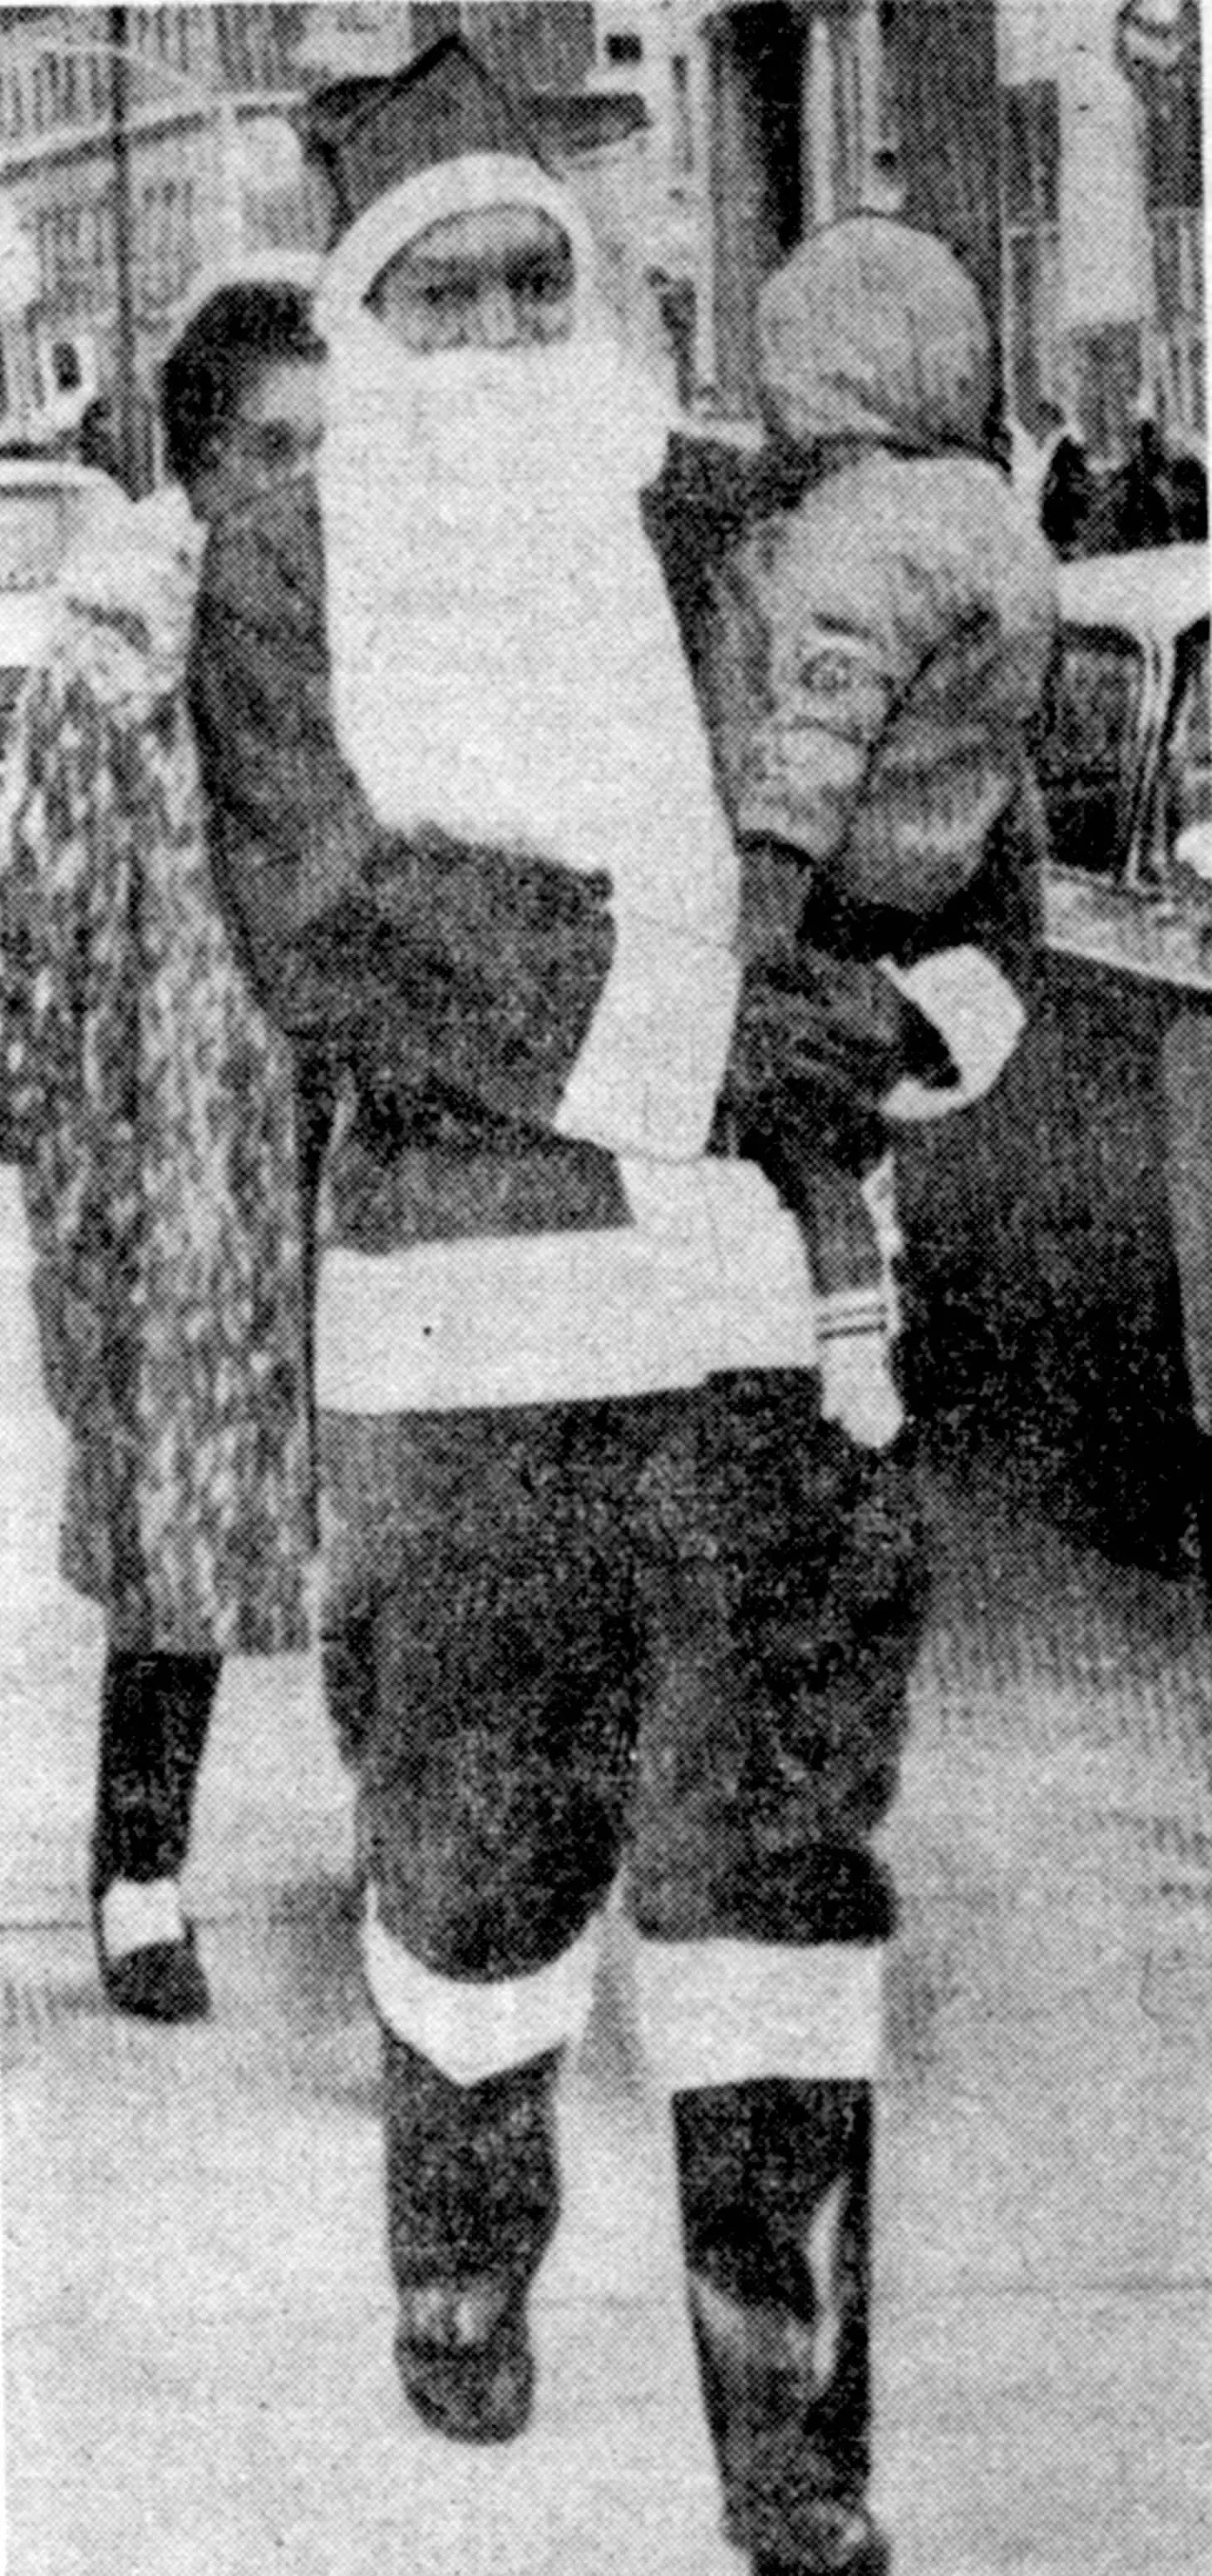 Merlin Kennedy is pictured wearing a Santa Claus suit, walking alongside the parade route while carrying a small child.